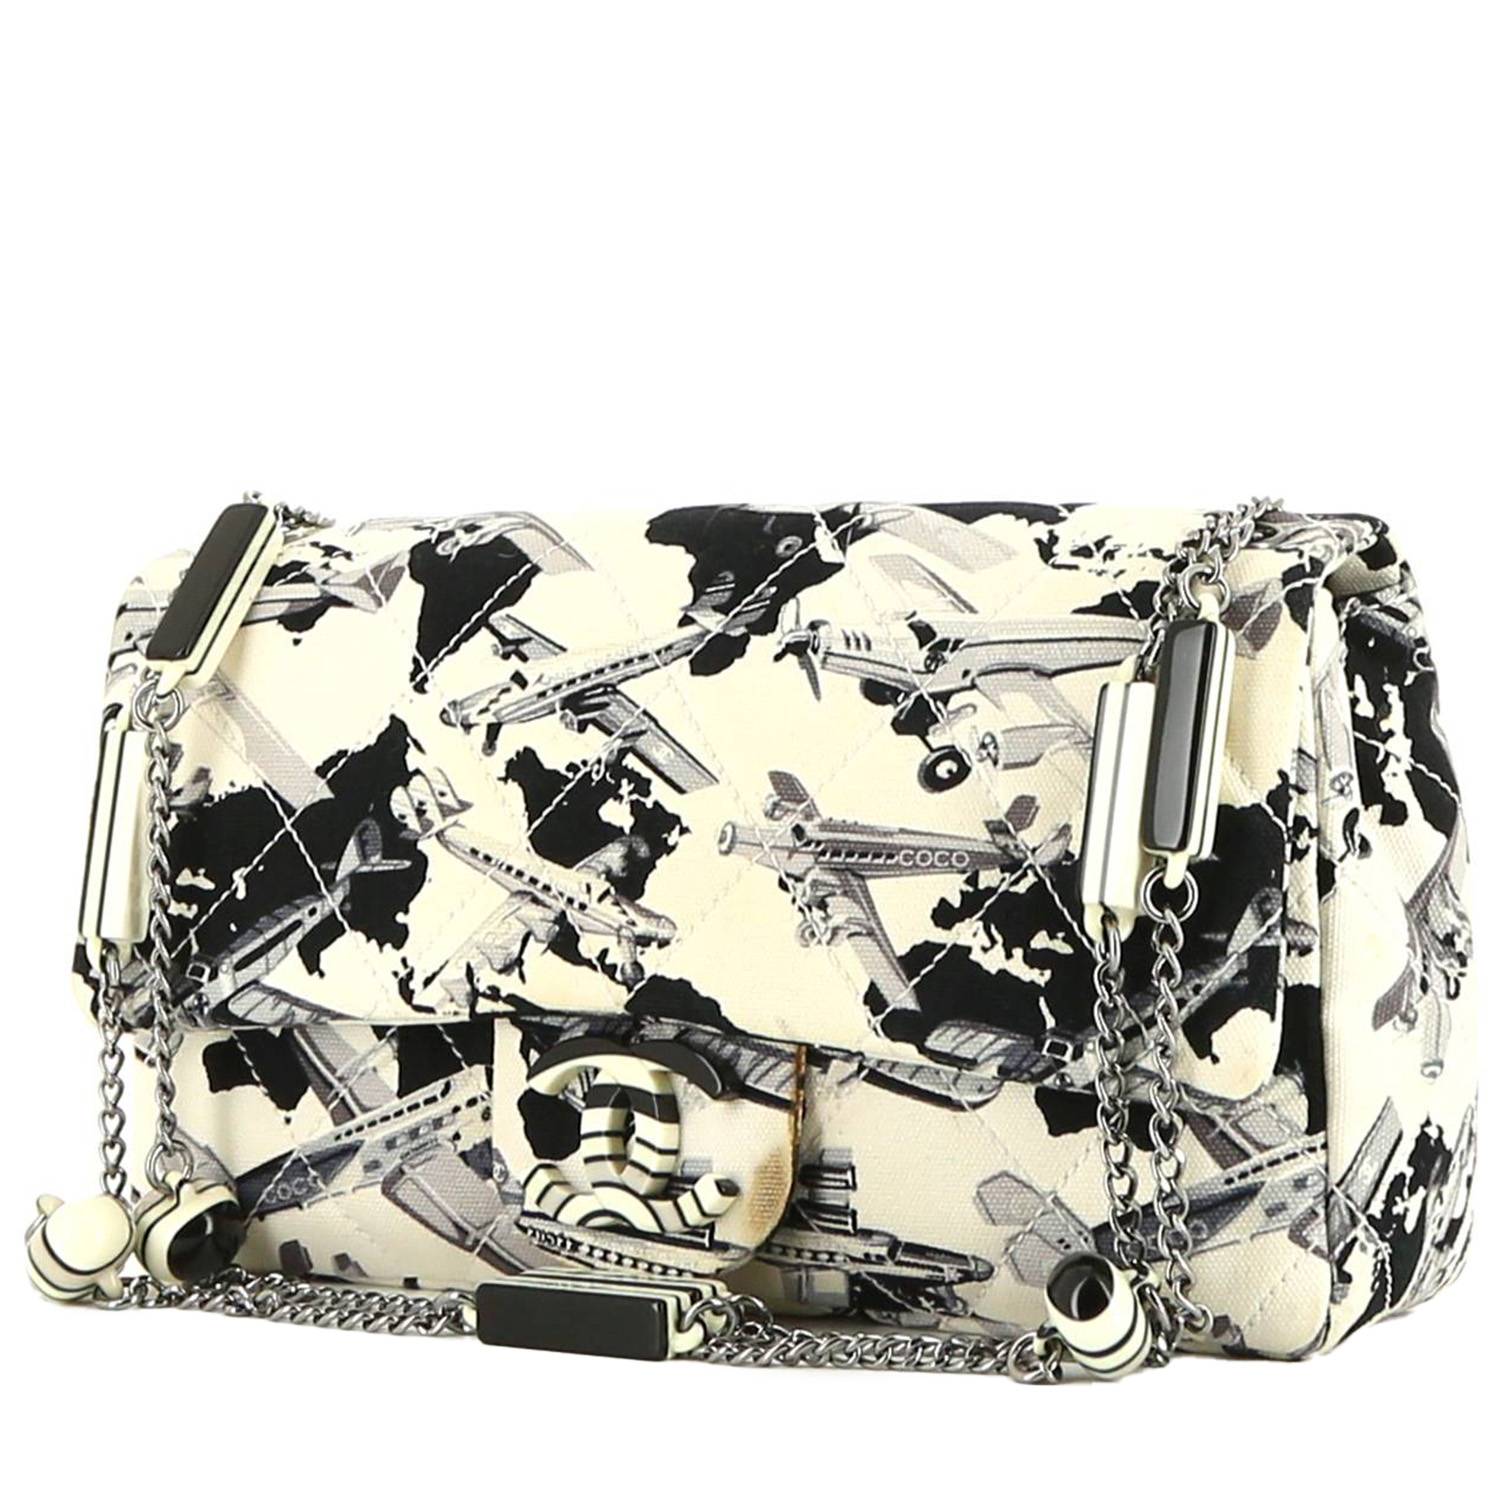 Chanel Timeless Handbag in White and Black Printed Patern Canvas